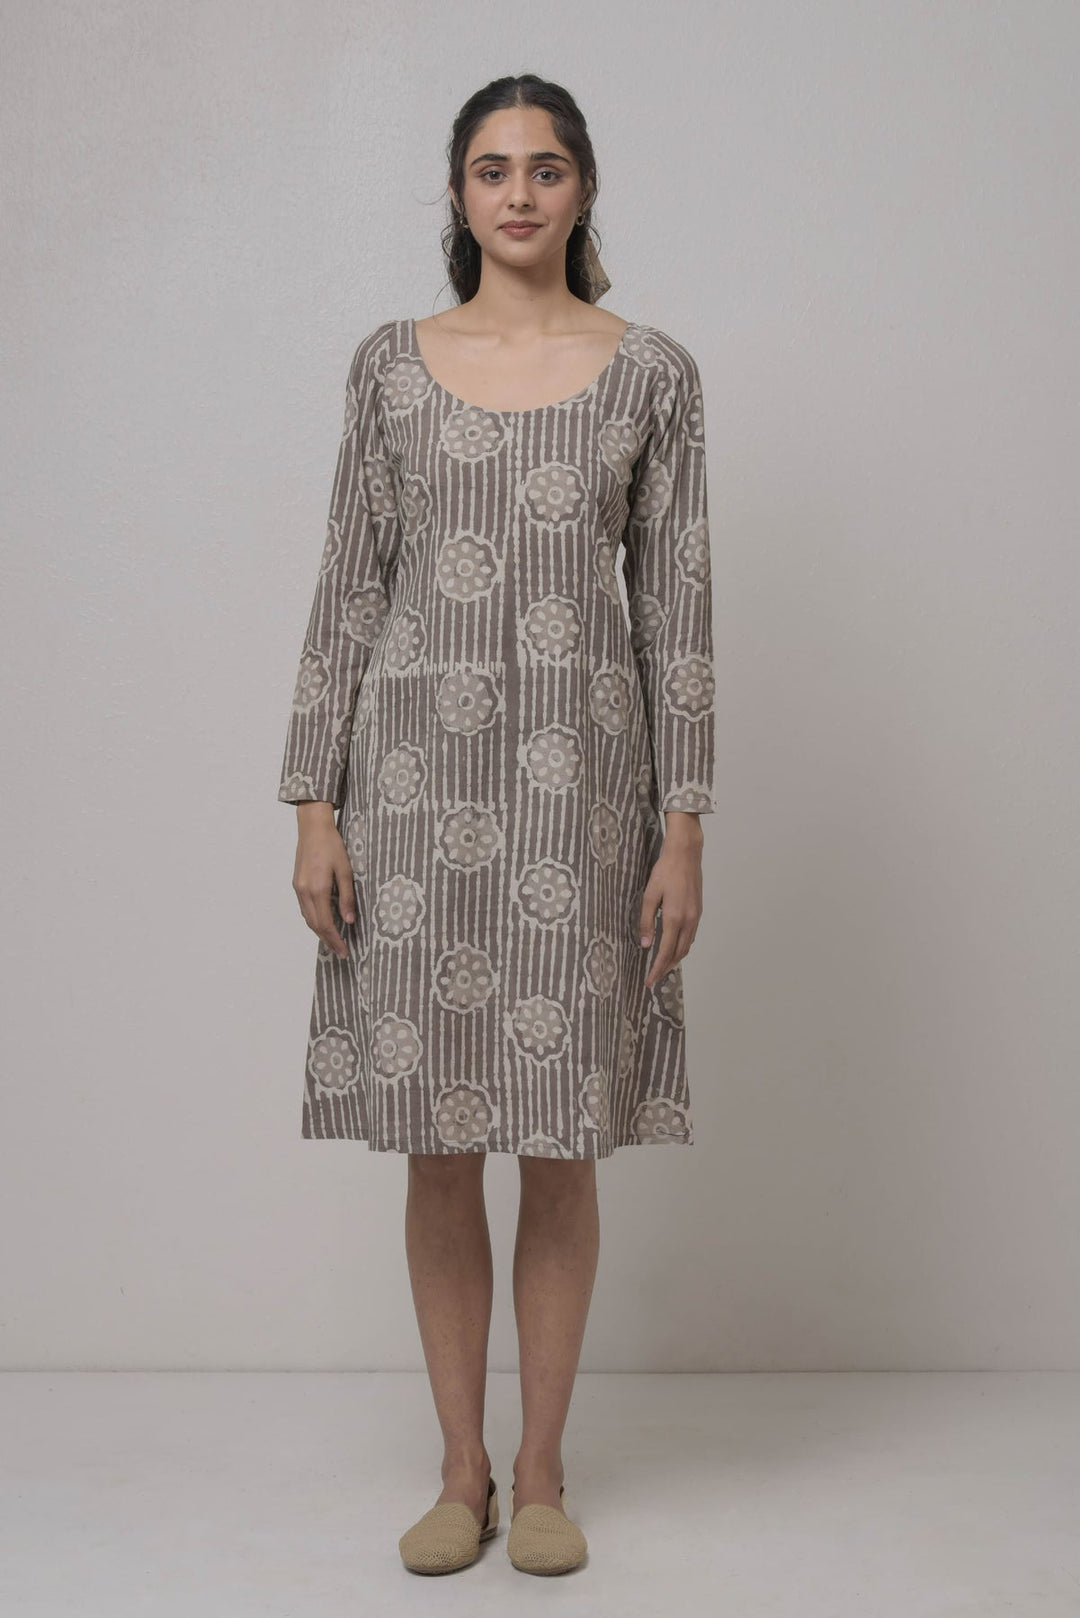 Hand-Printed Cotton Dress in Brown and Beige | Khari Handwoven Cotton Dress - Brown & Beige